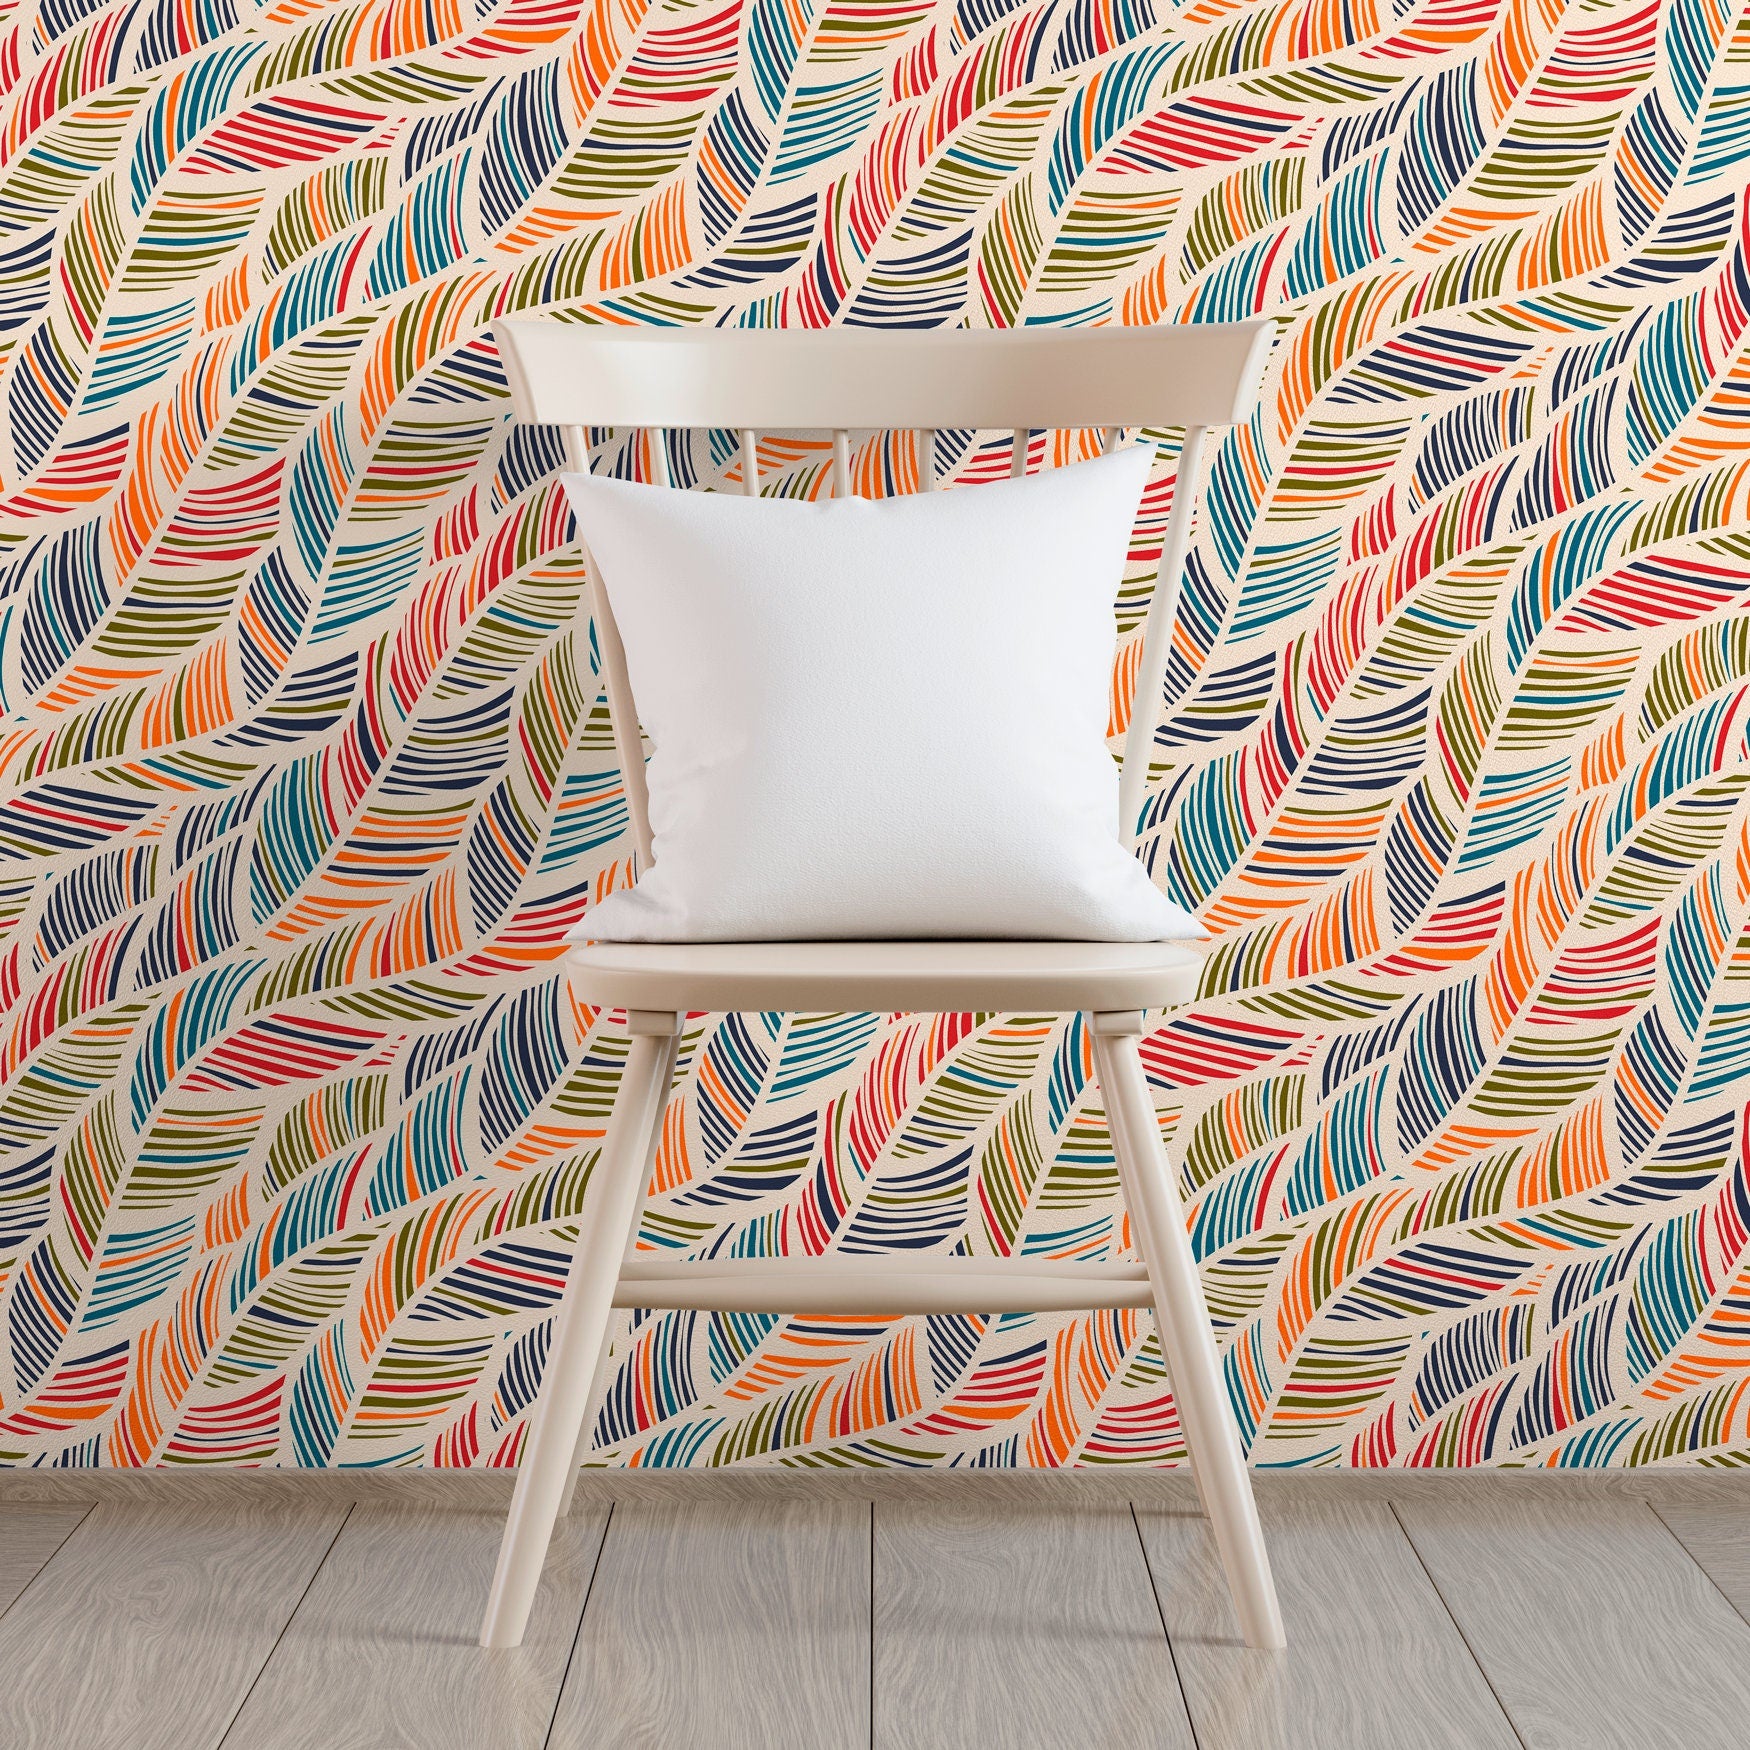 Removable Wallpaper Wallpaper Colorful Waves Wallpaper Peel and Stick Wallpaper Wall Paper - B041